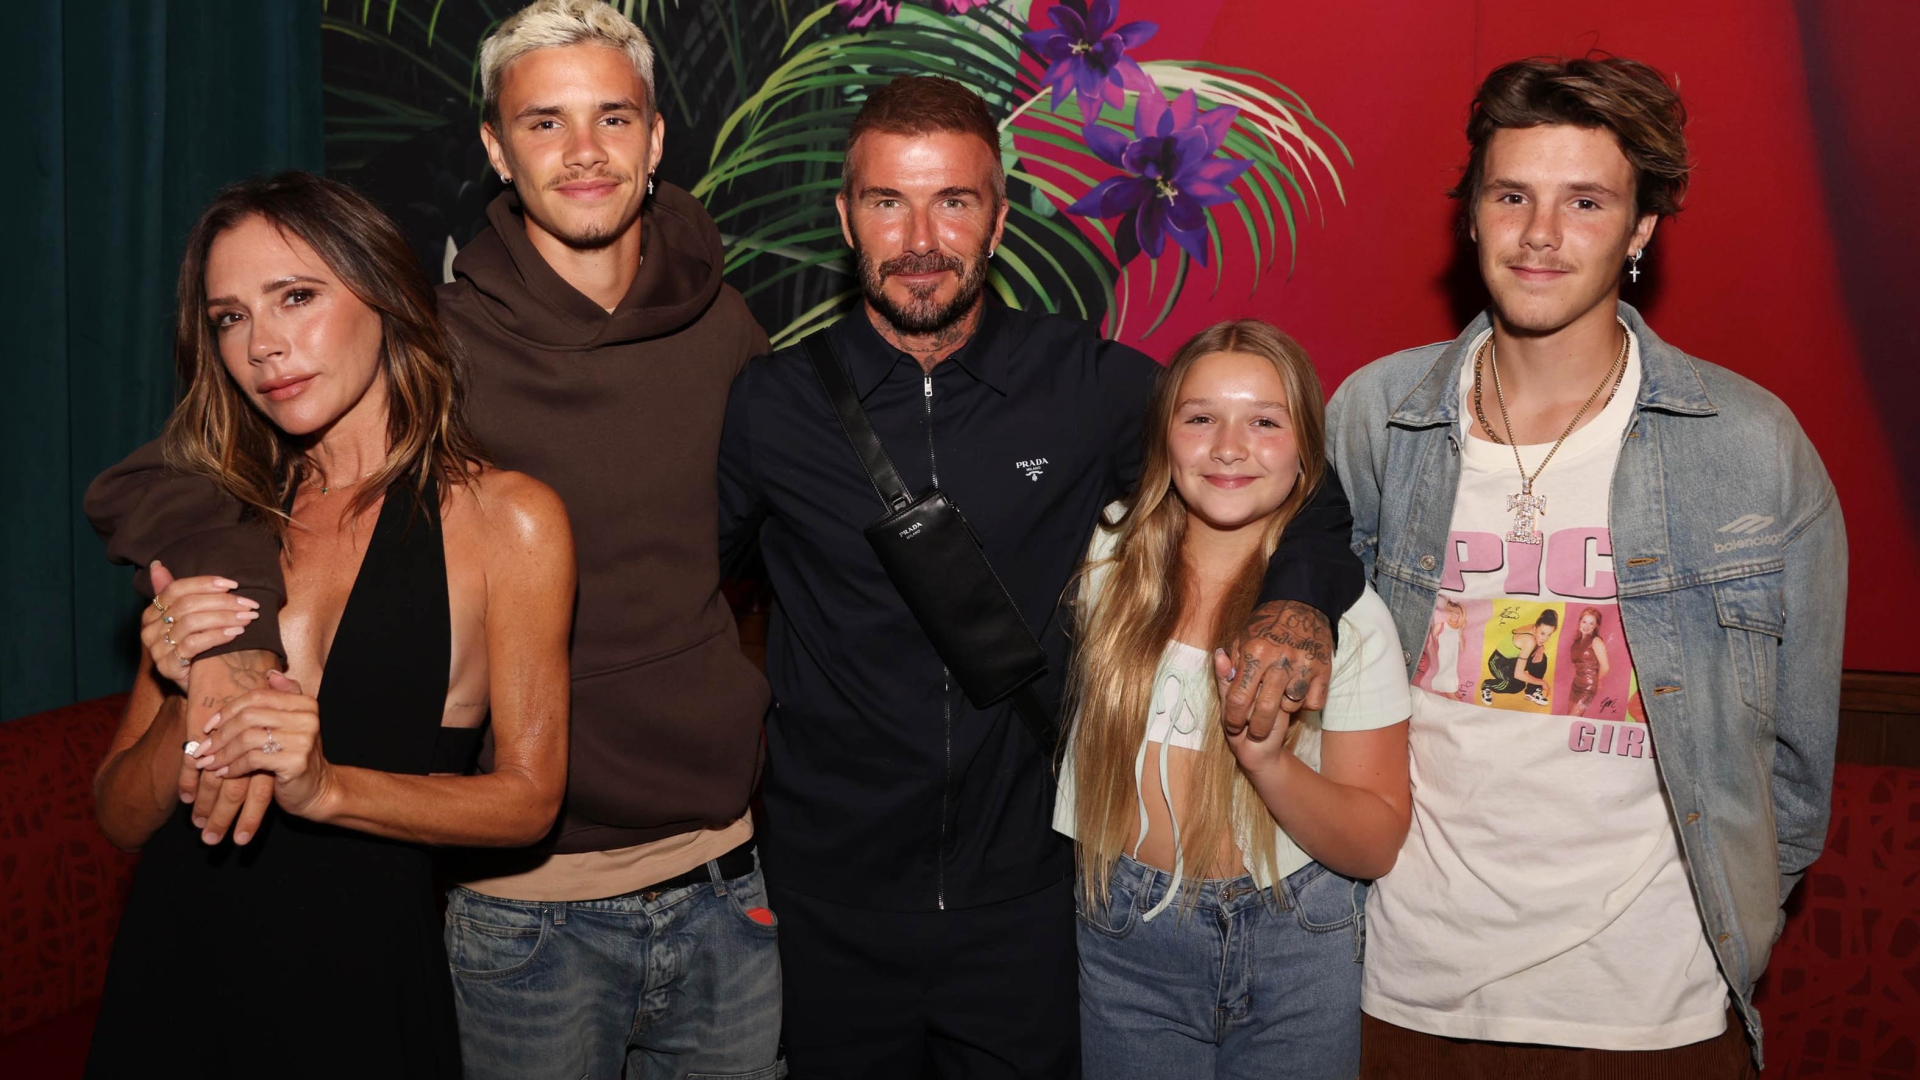 David and Victoria Beckham spend a night out with their children at a steakhouse in Miami.